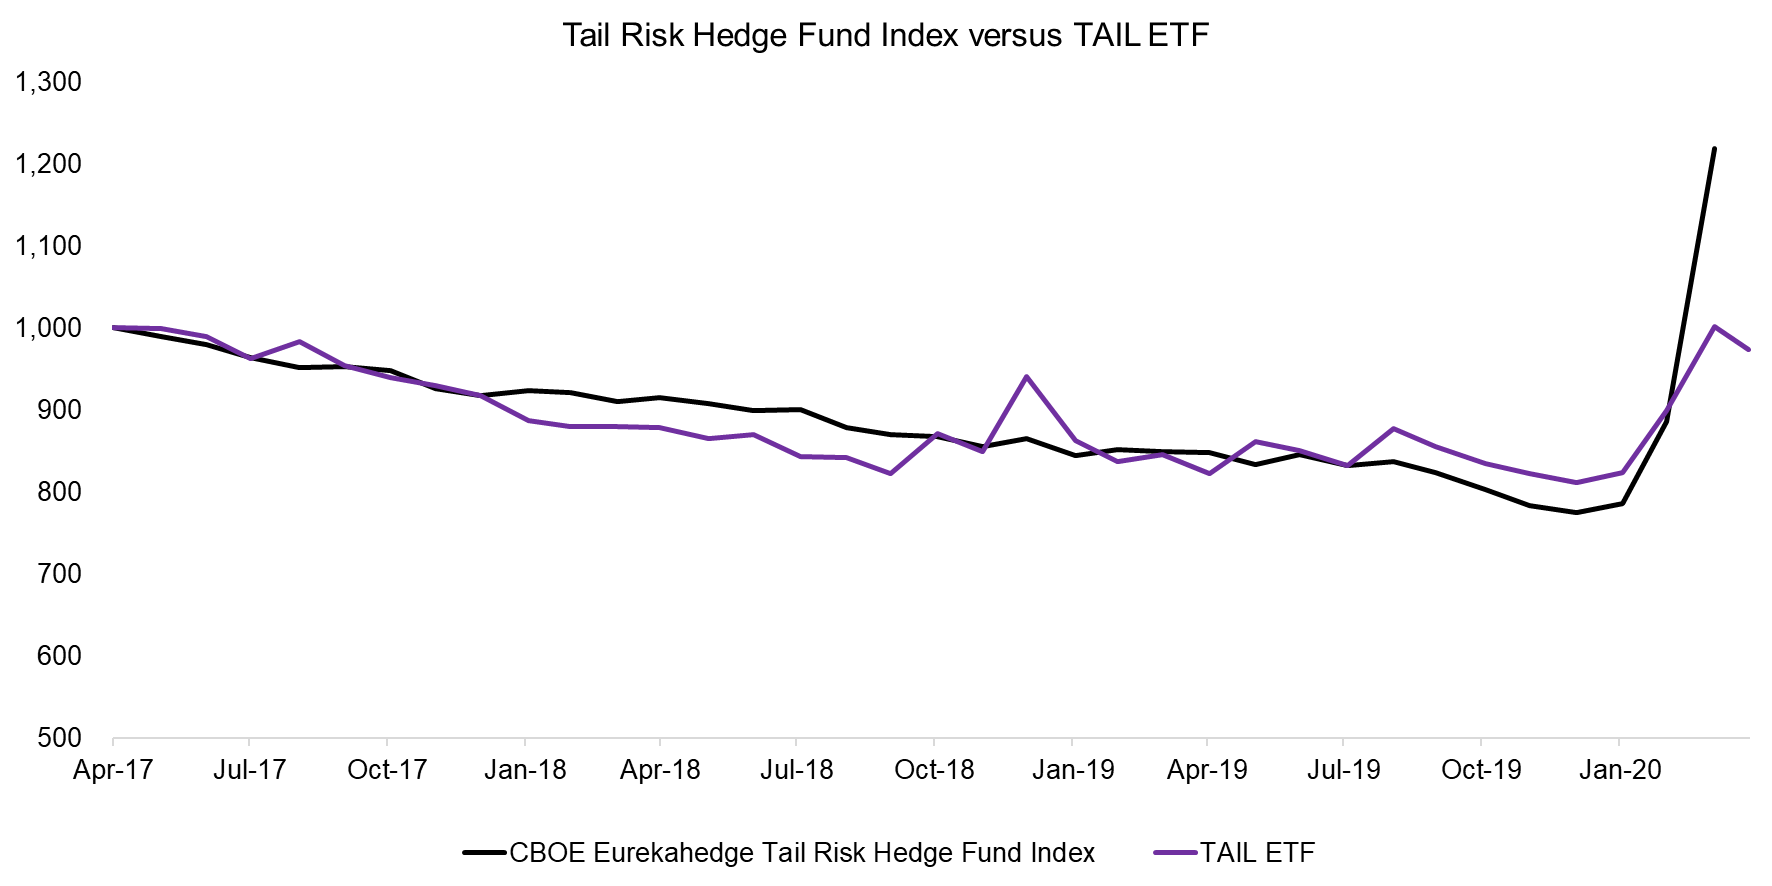 Tail Risk Hedge Fund Index versus TAIL ETF